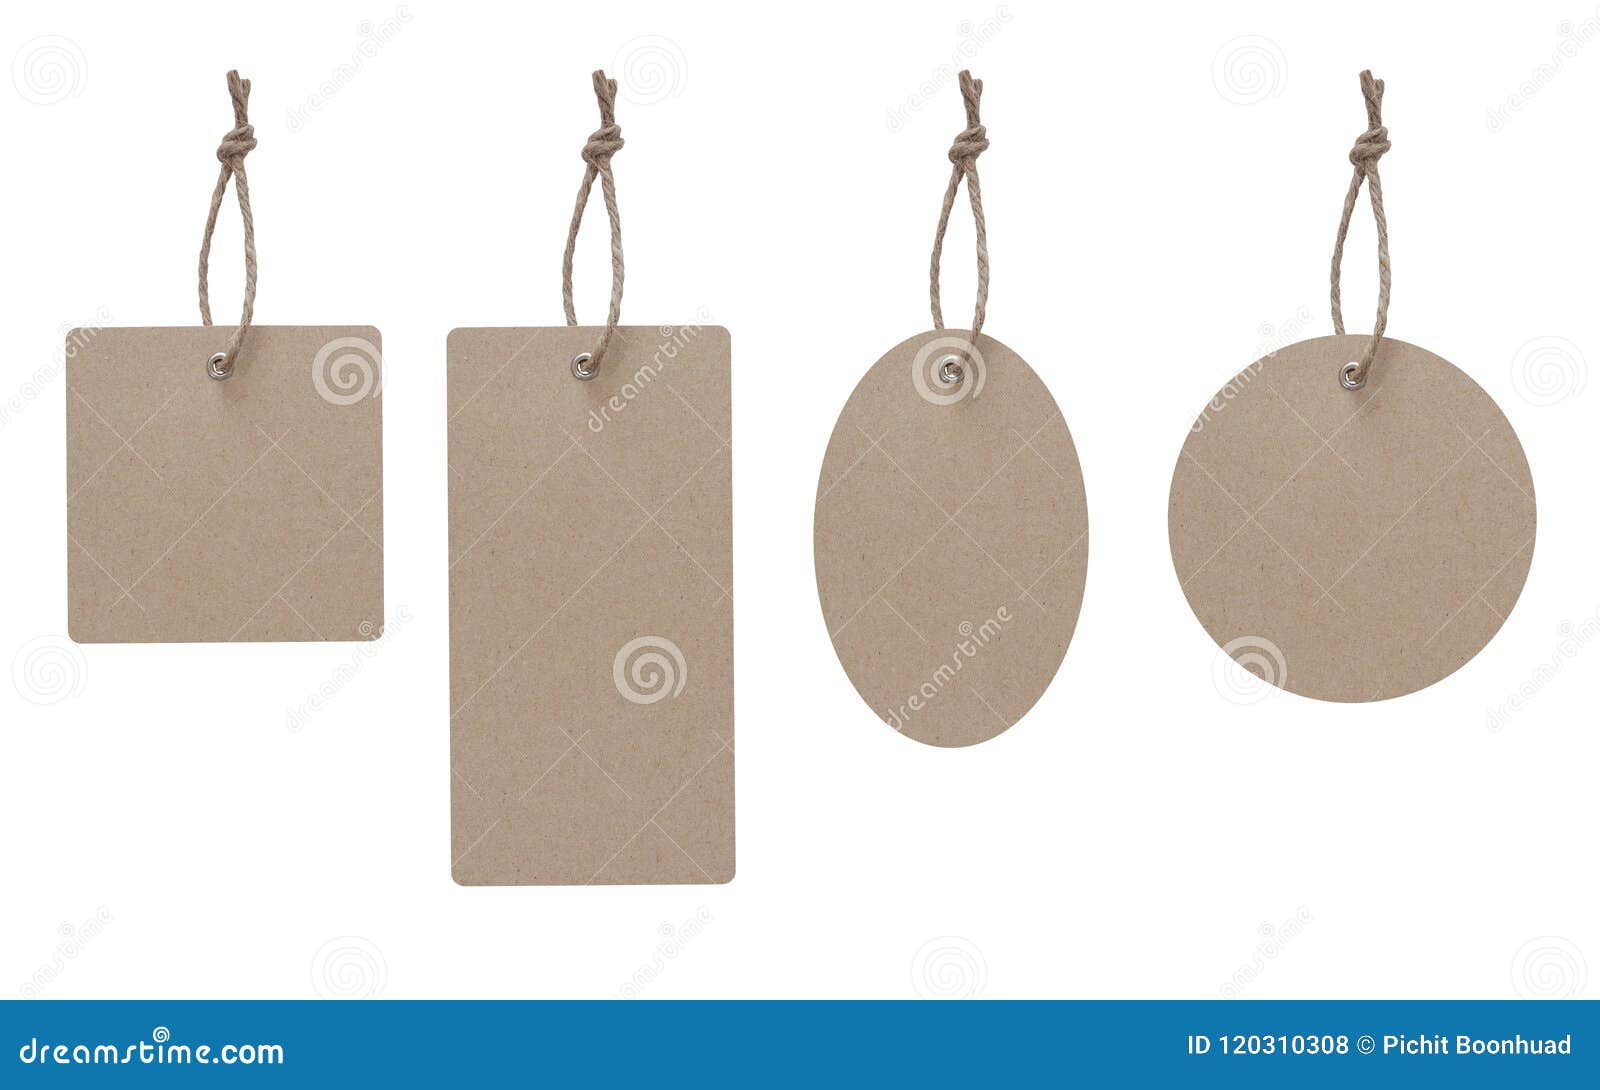 blank price tag made frome craft paper isolate on white with clipping path